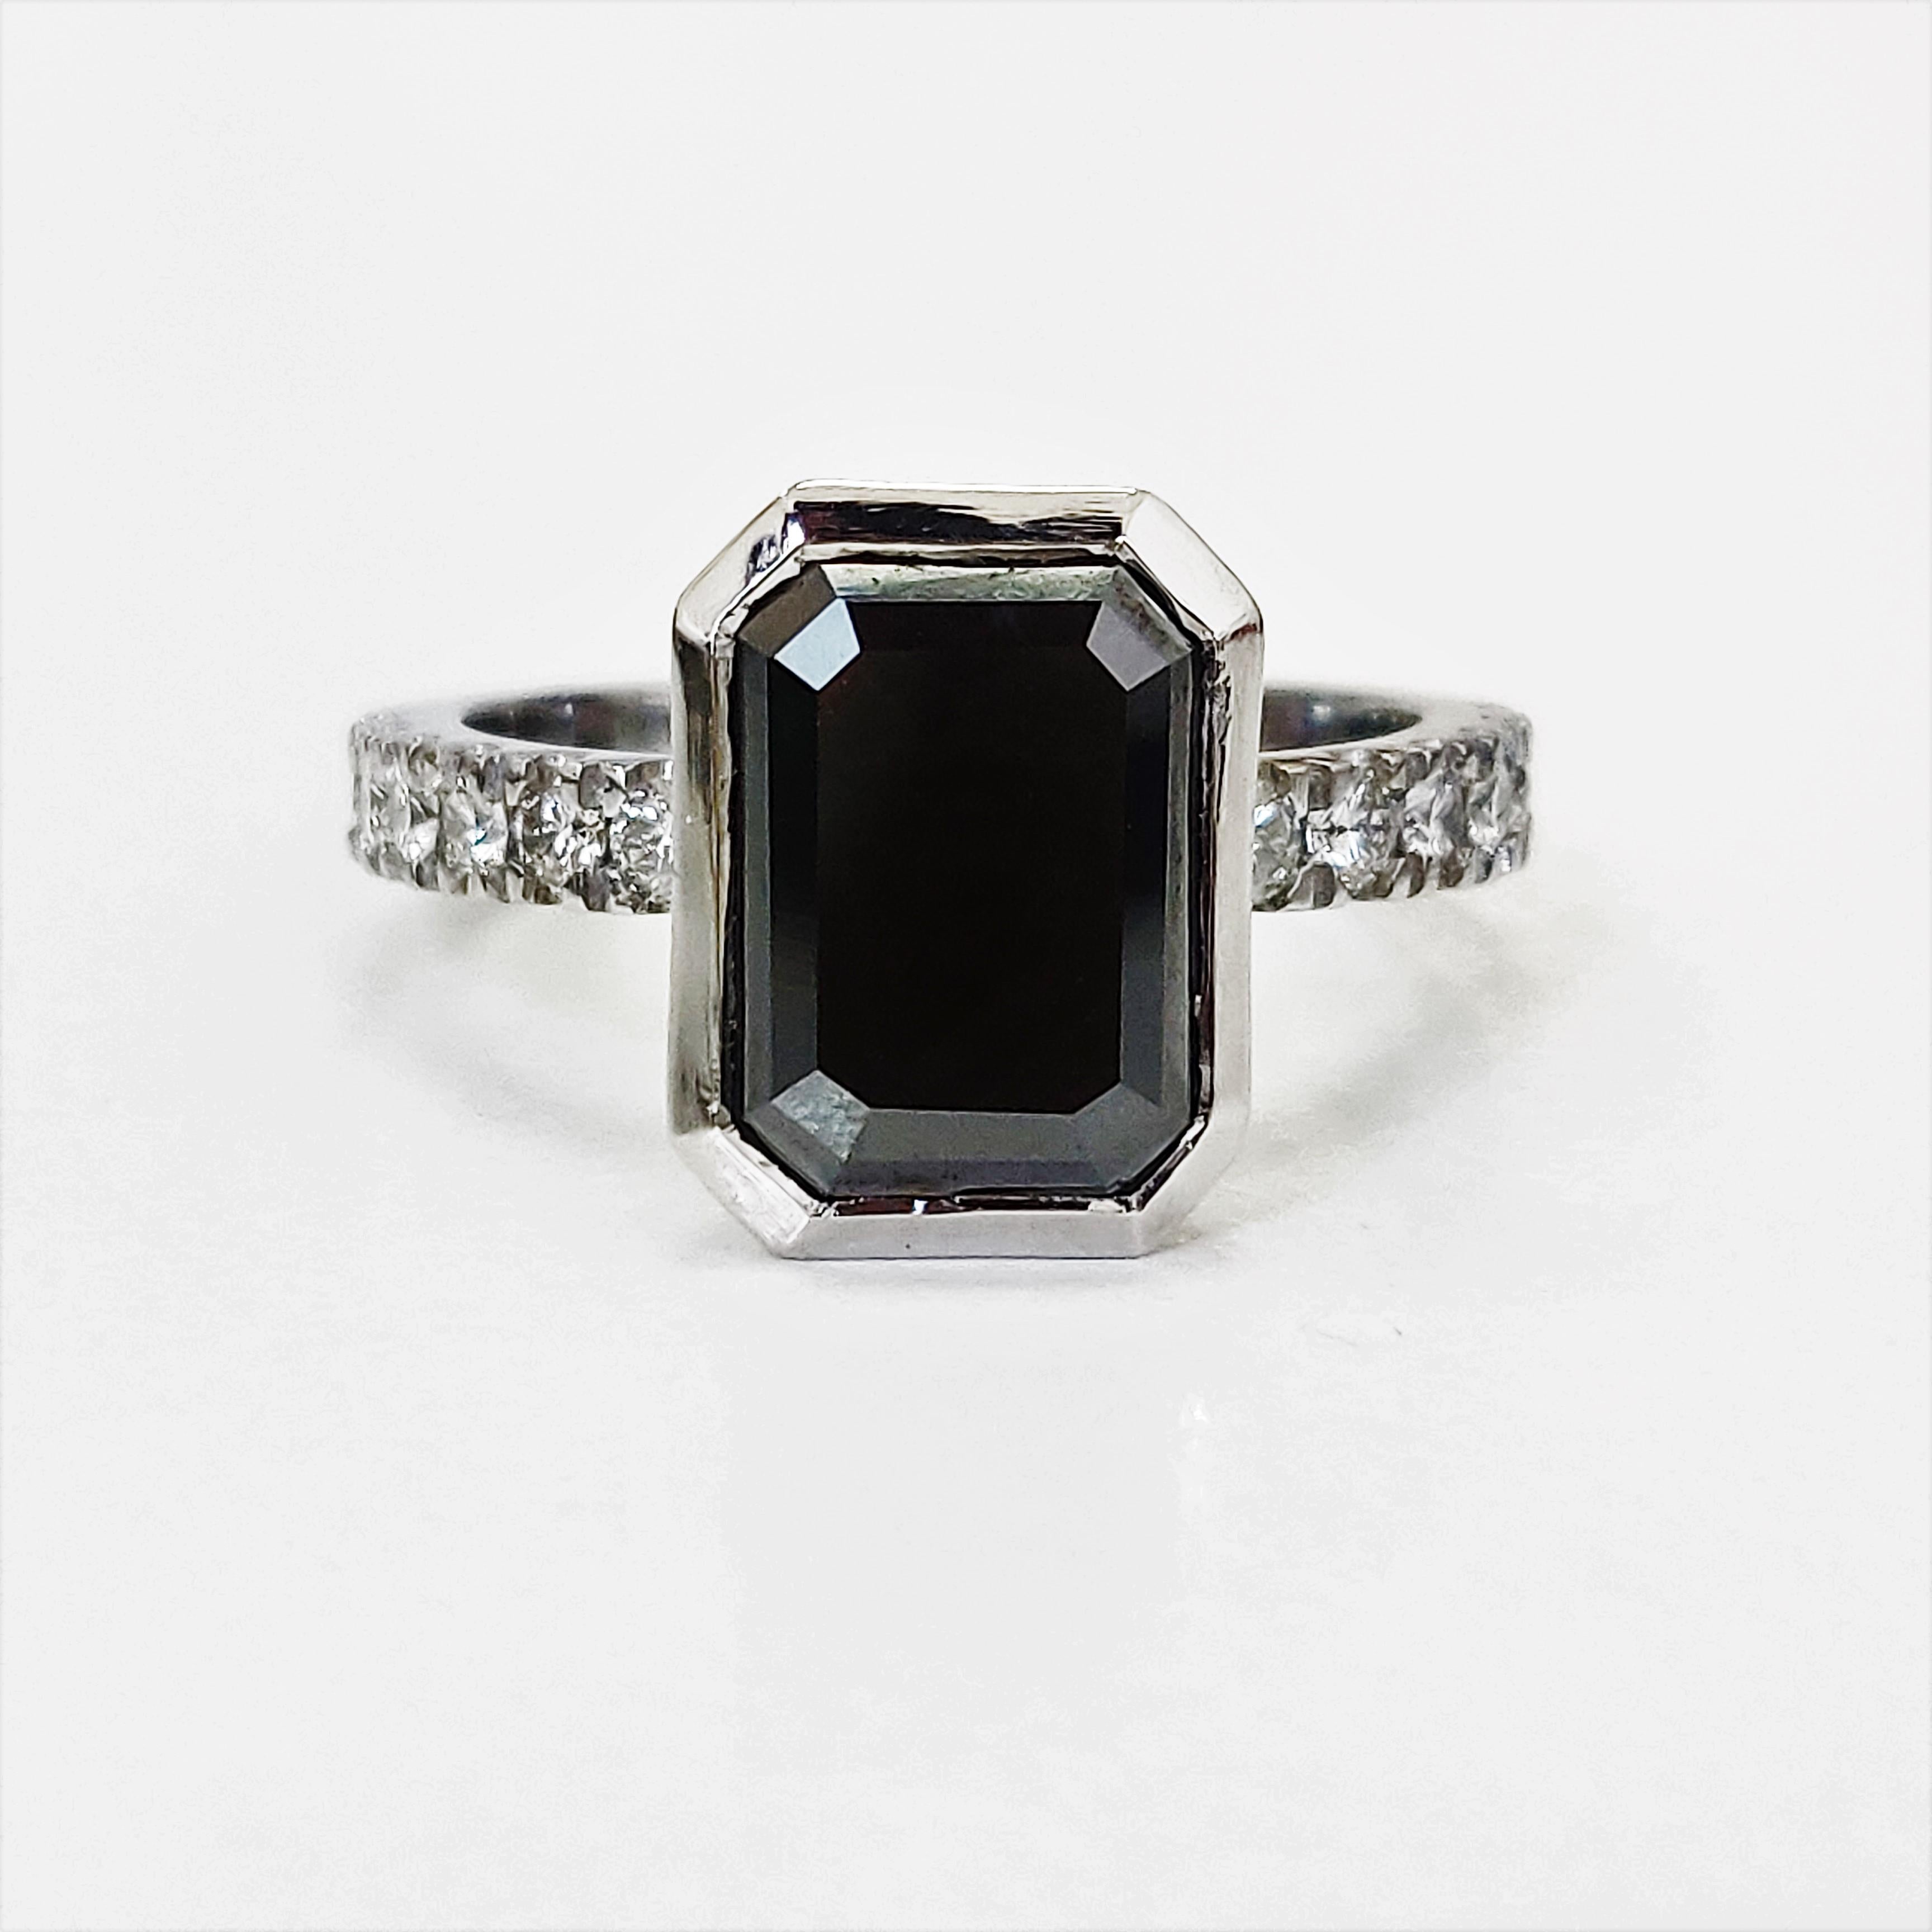 -Total Carat Weight: 3.75 Carats
-14K White Gold
-Size: Resizable

Notes:
- All diamonds are natural, earth-mined diamonds that were suitable for Color Enhancement into Fancy Black color.
- All Jewelry are made to order hence any size and gold